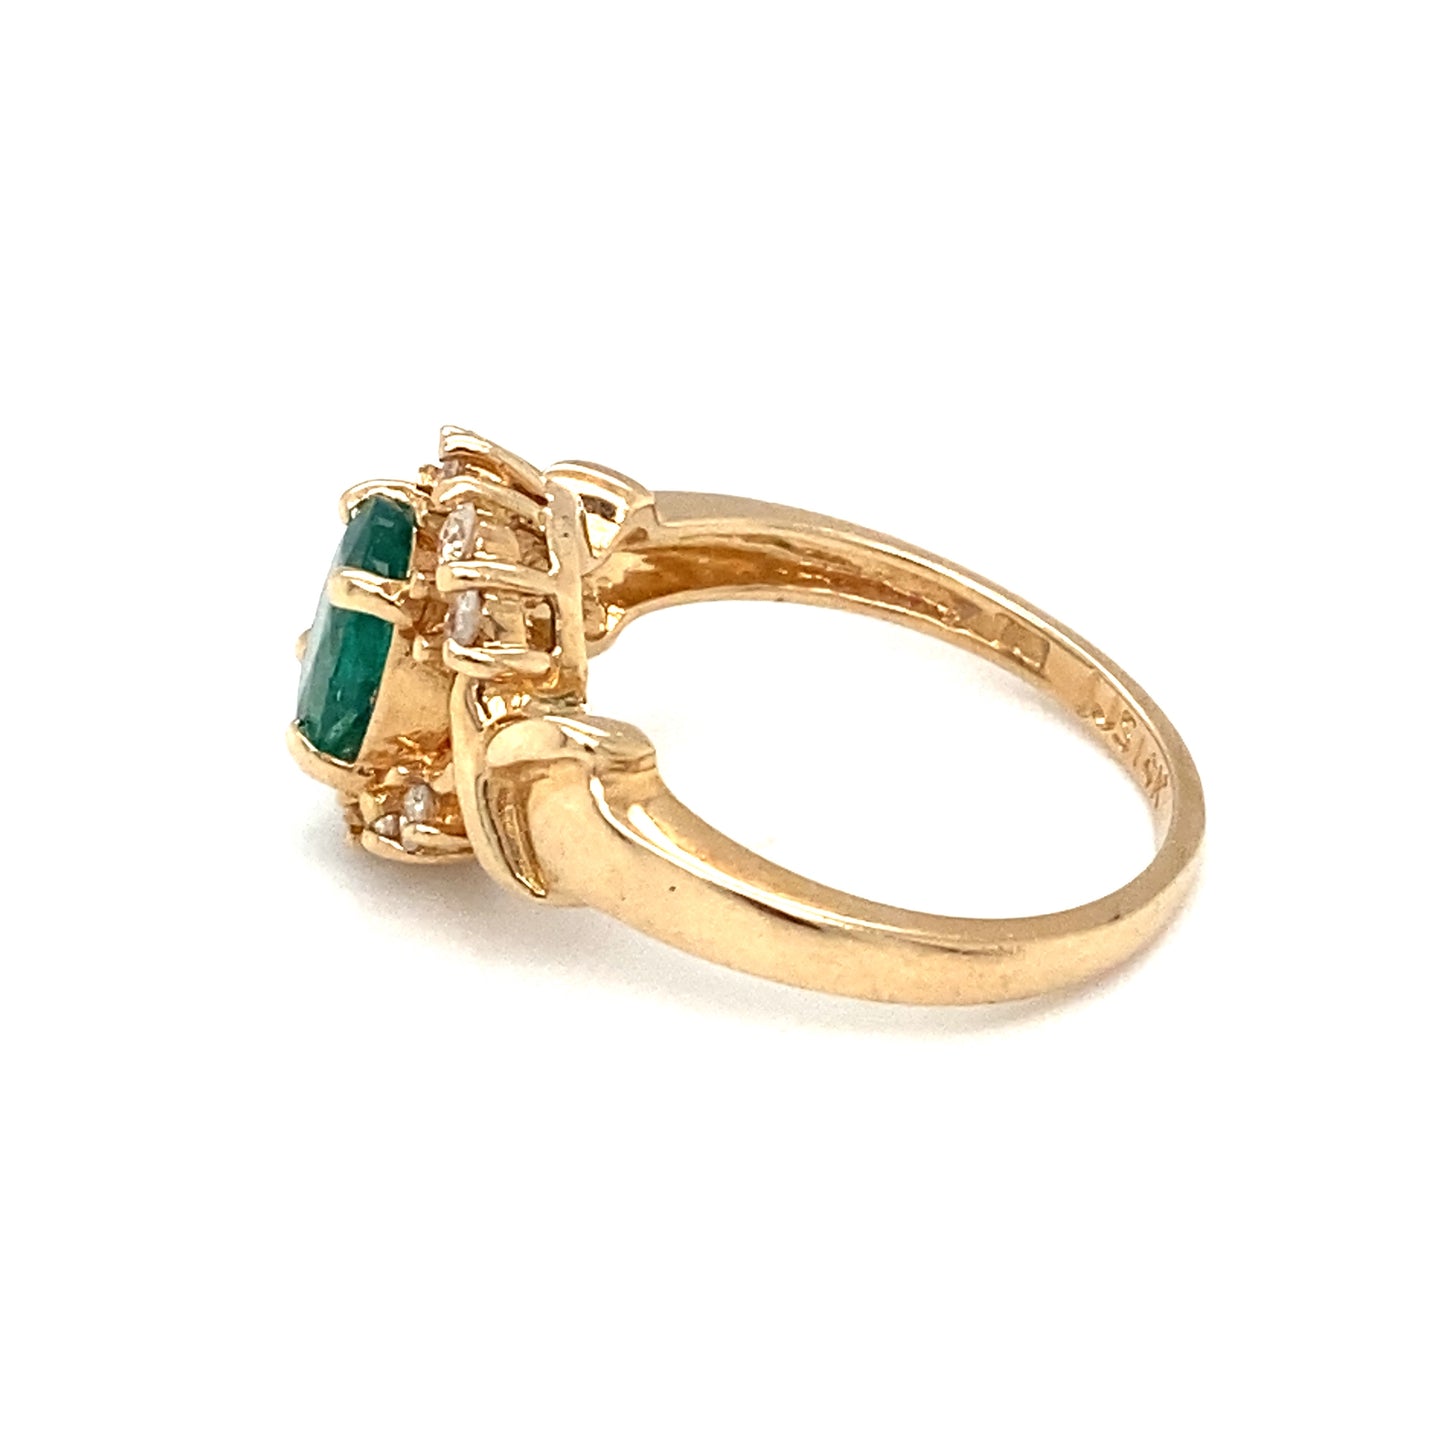 Circa 2000s 1.30ct Oval Emerald and Diamond Ring in 14K Gold